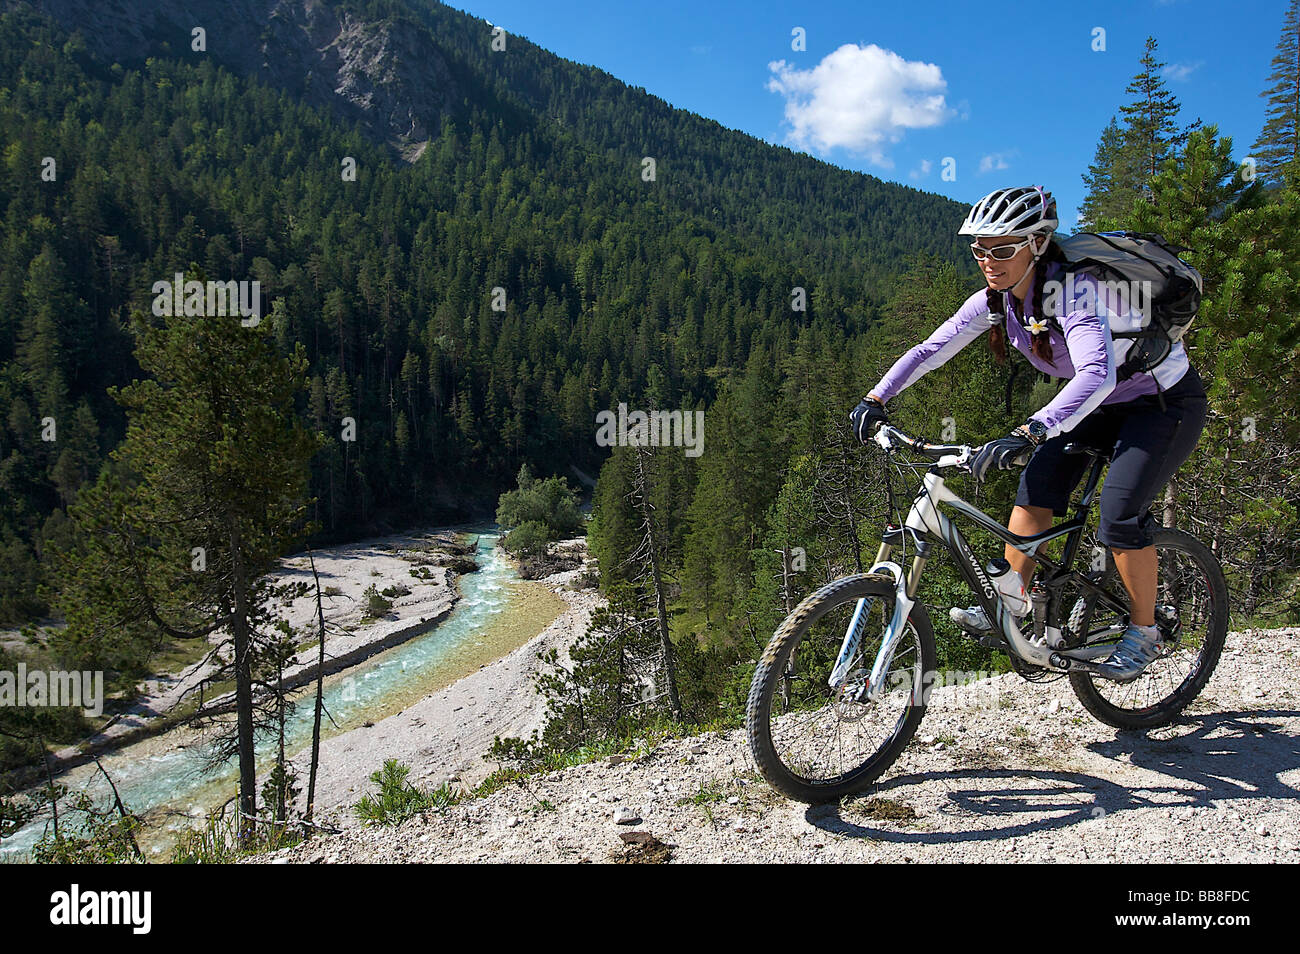 Mountainbike Rider High Resolution Stock Photography and Images - Alamy